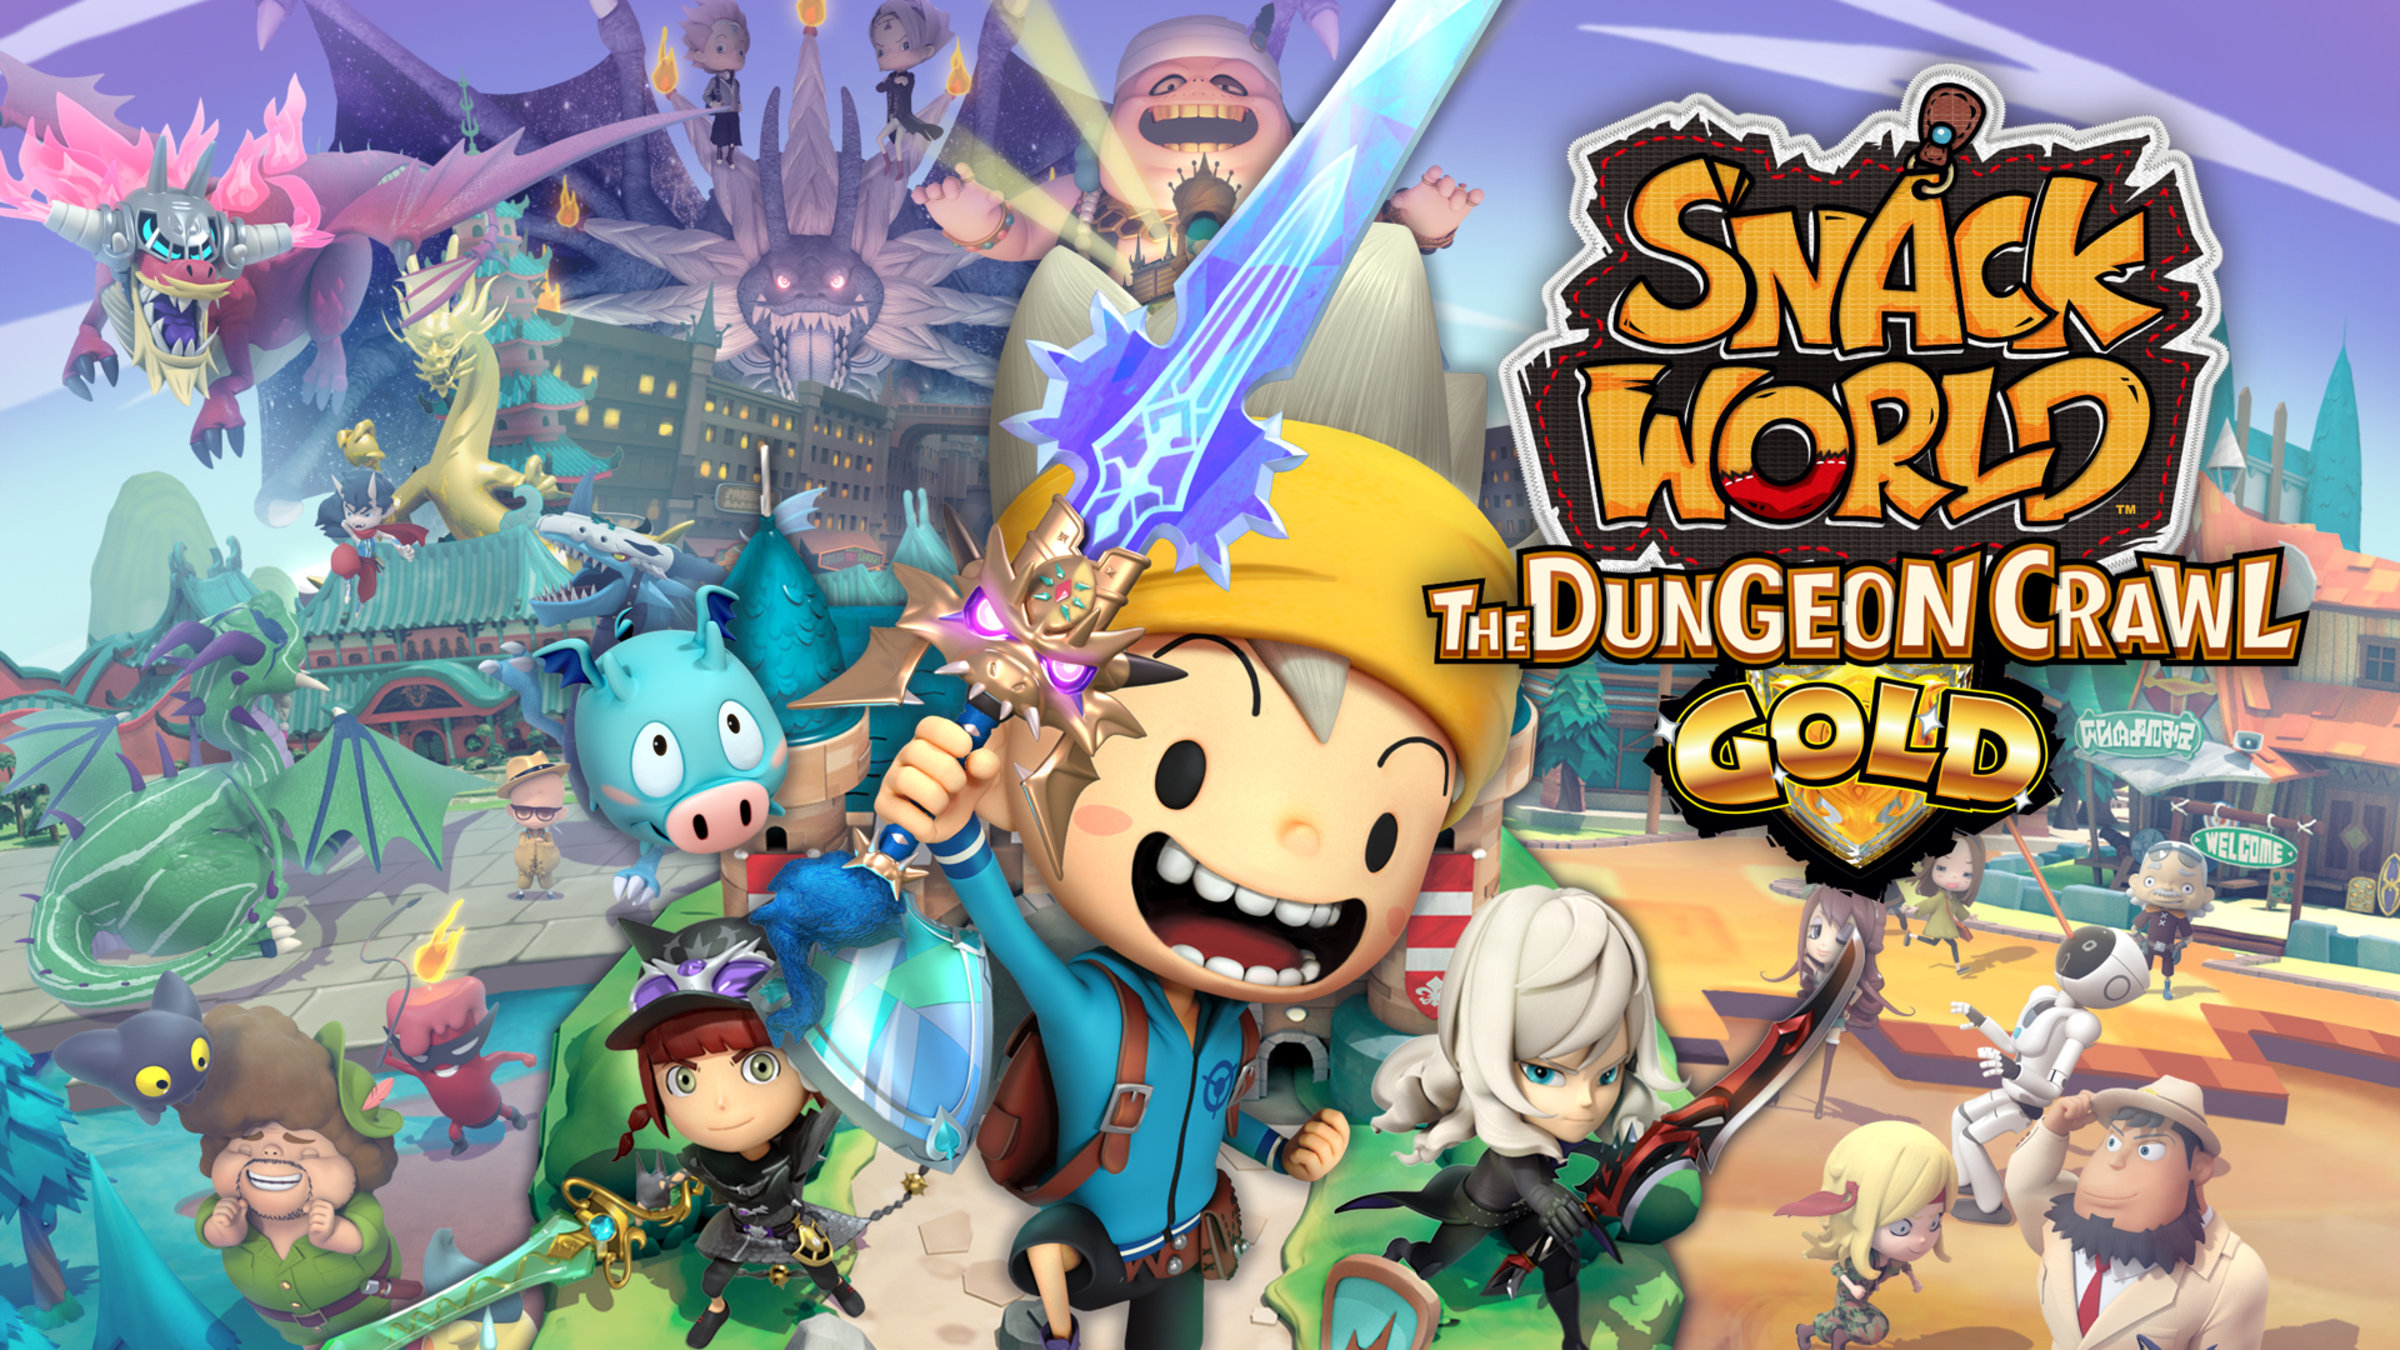 SNACK WORLD: THE DUNGEON CRAWL — GOLD for Nintendo Switch - Nintendo  Official Site